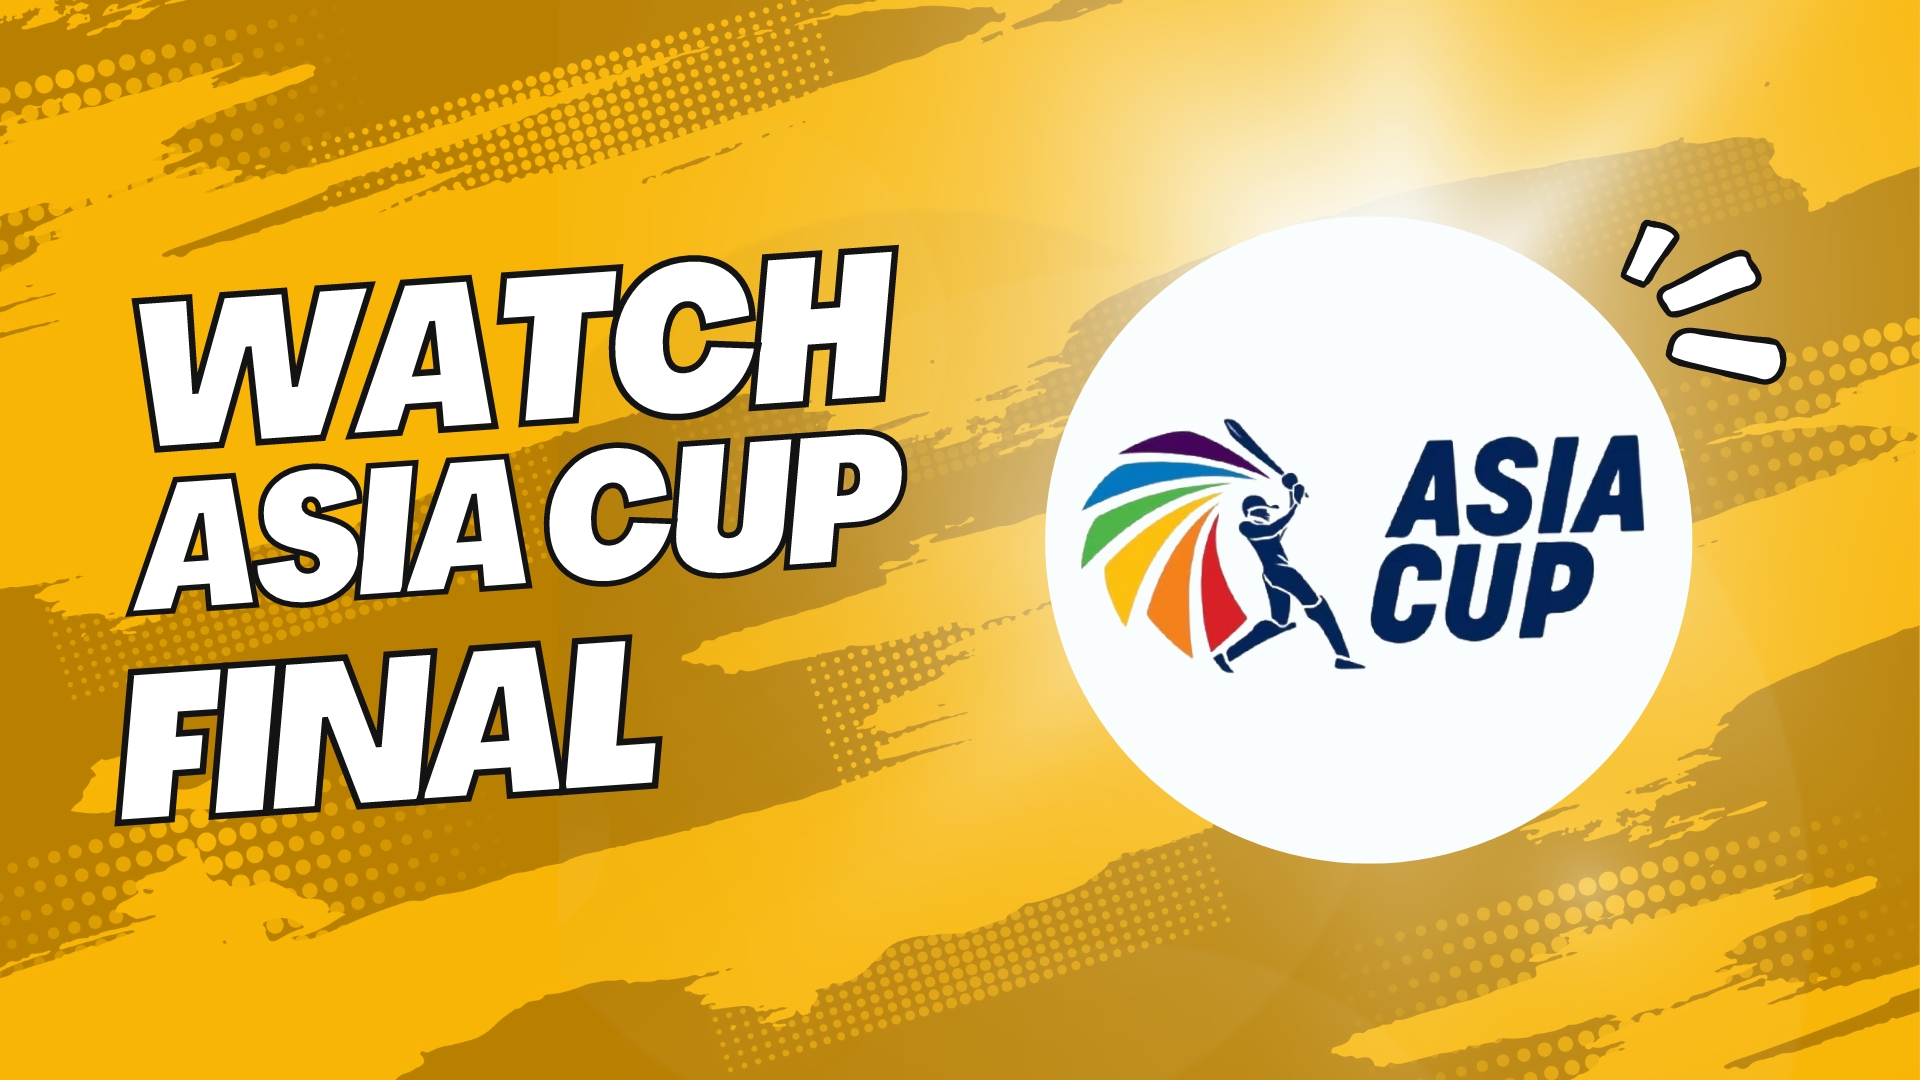 How to Watch Asia Cup Final Match Online